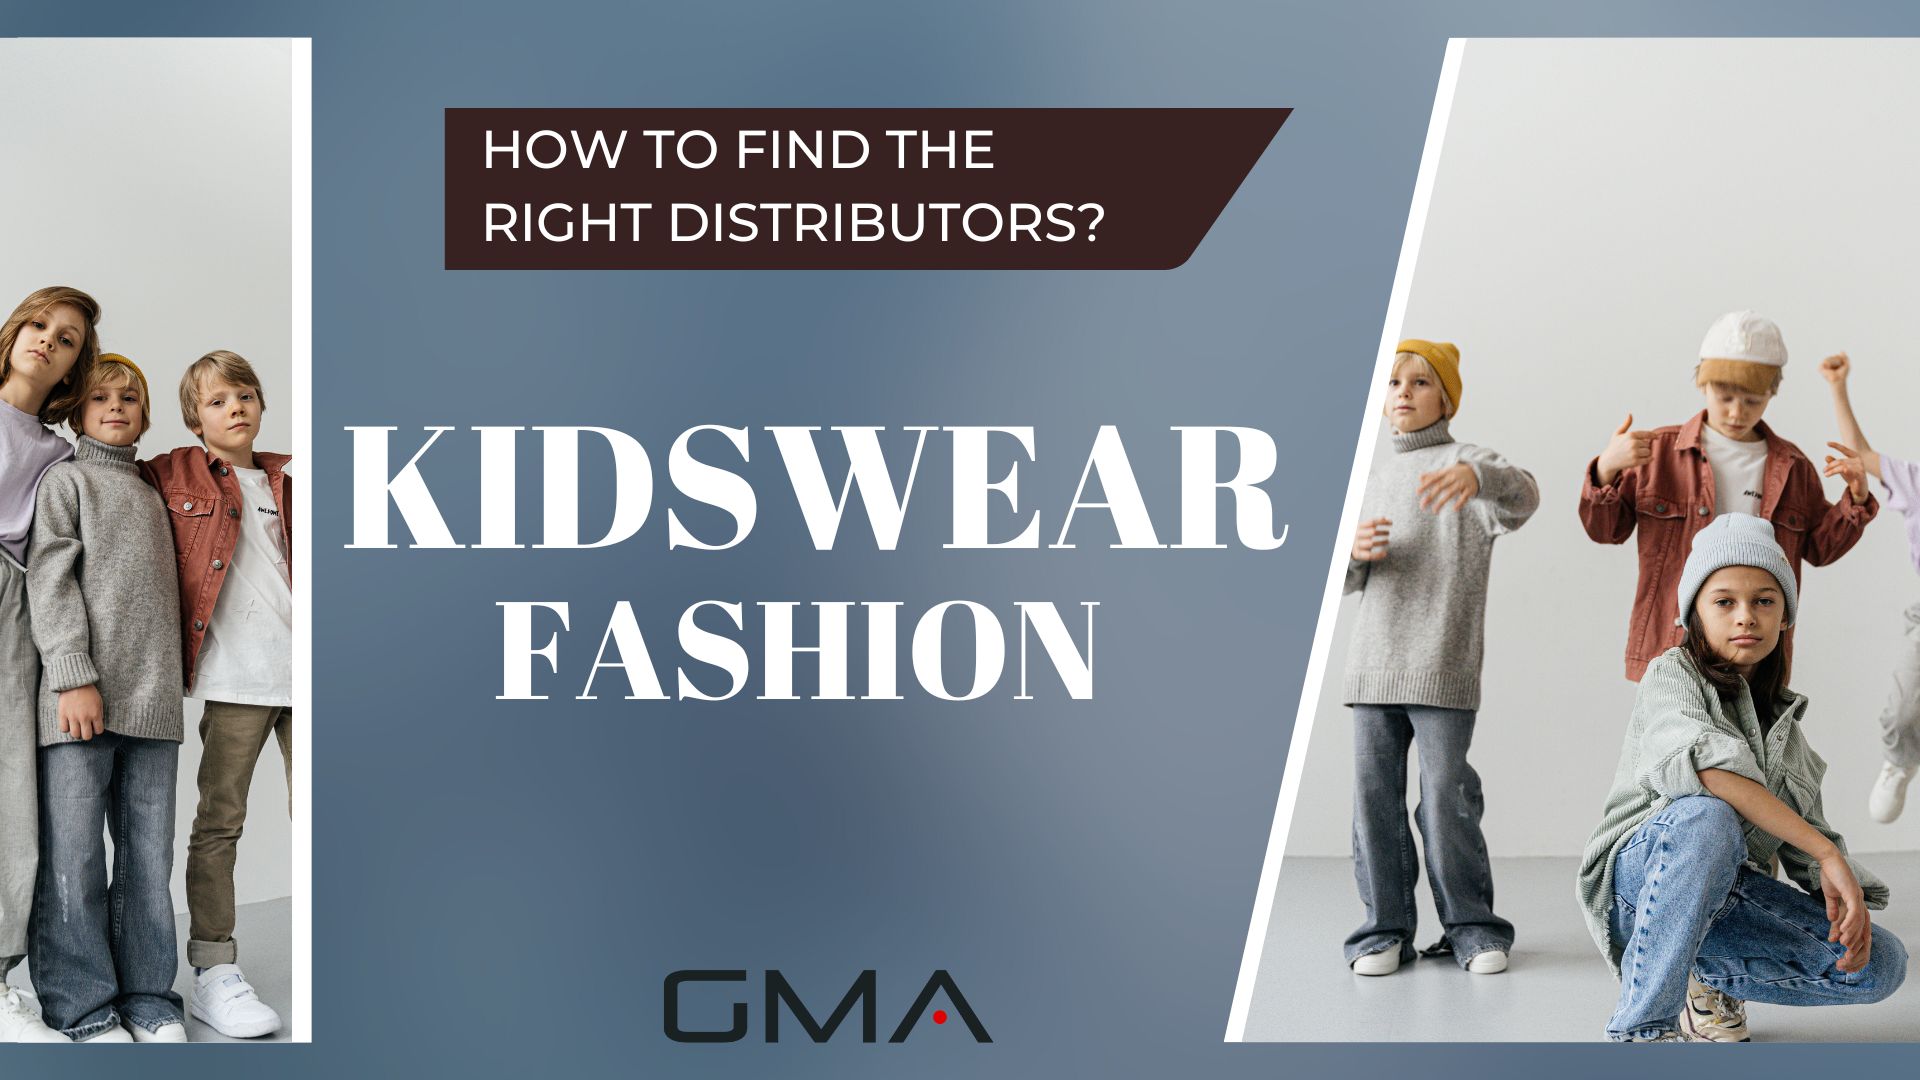 Kidswear In China: How To Find The Right Distributors?